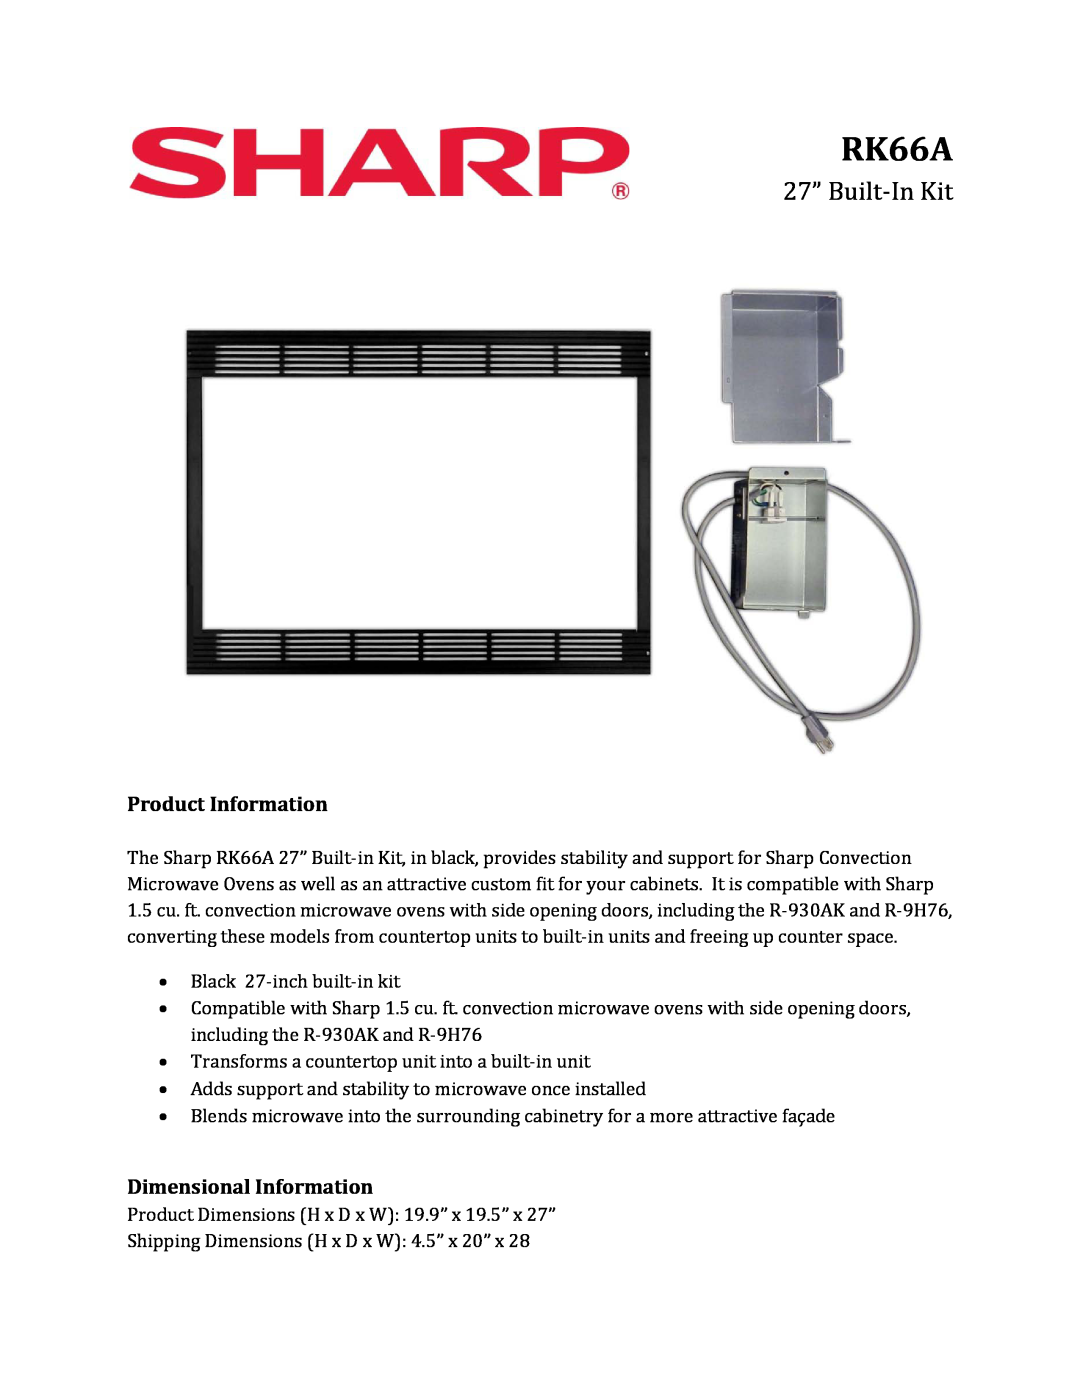 Sharp RK66A - BLACK dimensions 27” Built-In Kit, Product Information, Dimensional Information 